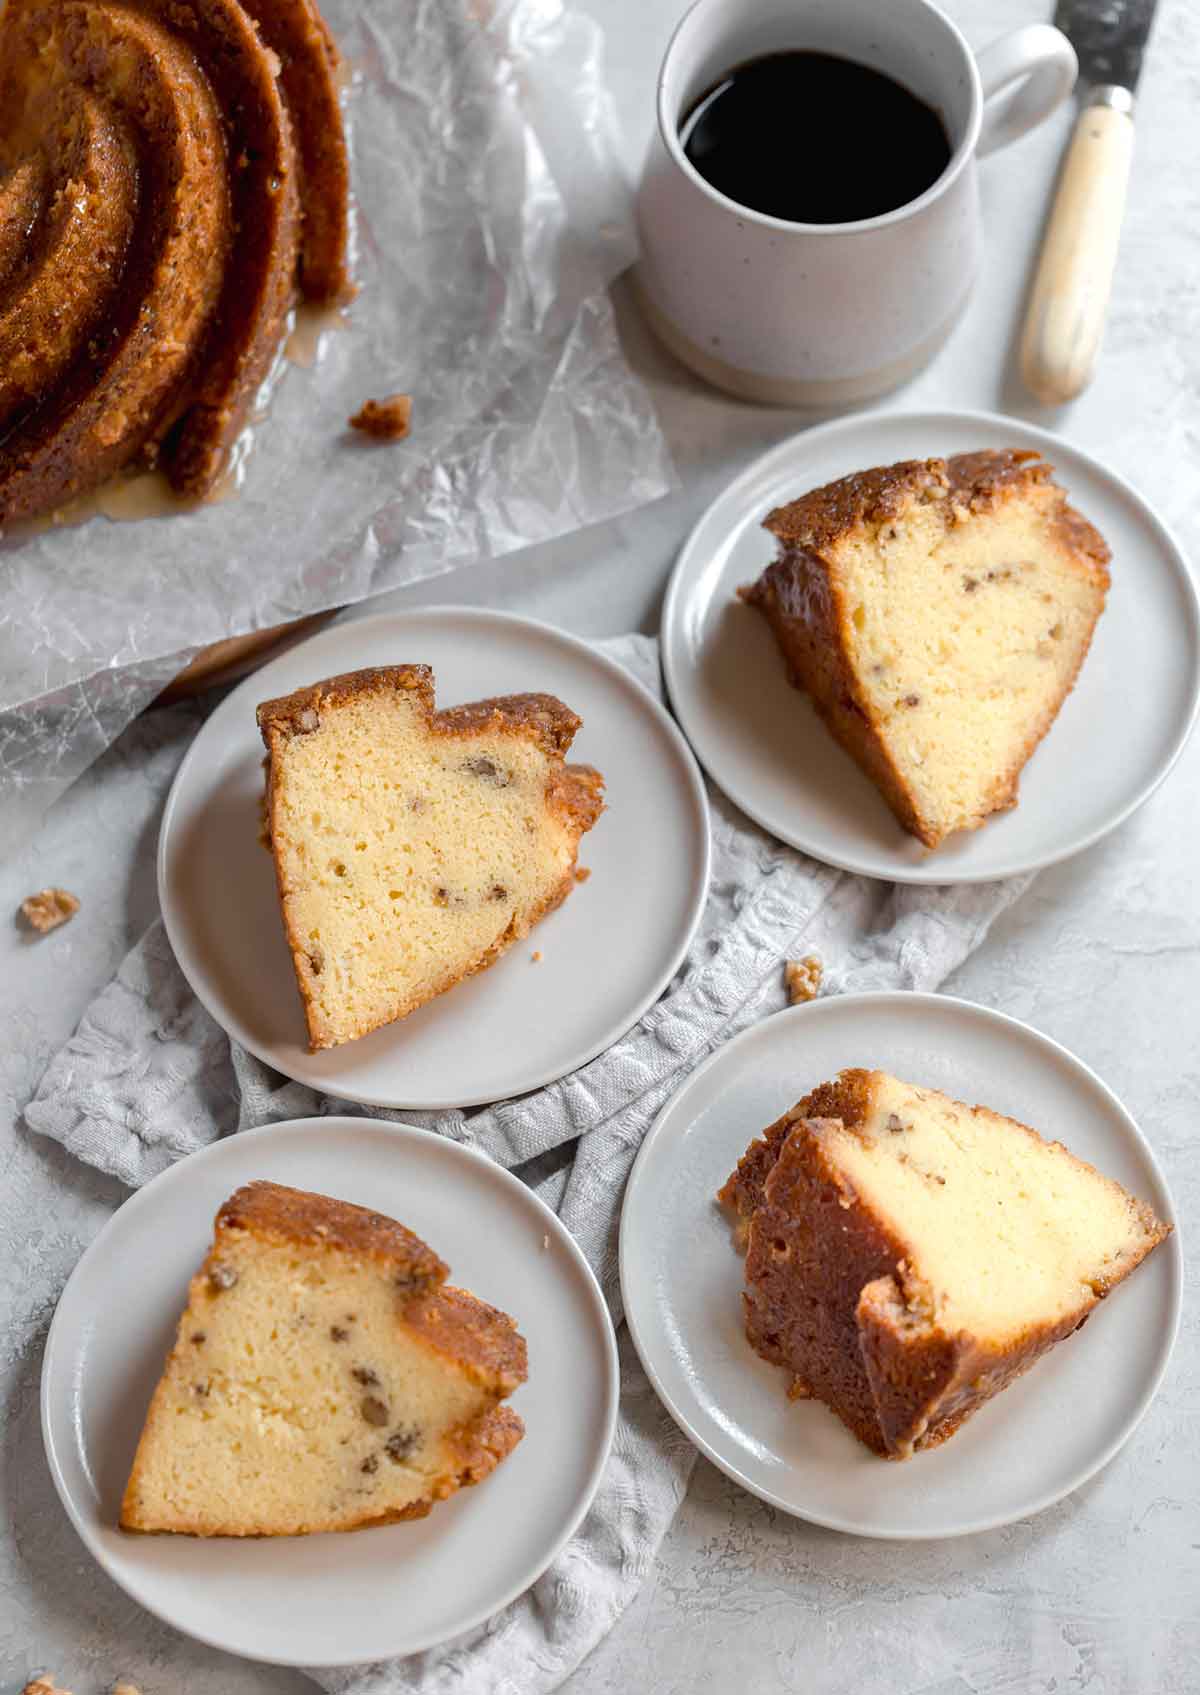 Four slices of rum cake on white plates with a cup of coffee in the background.